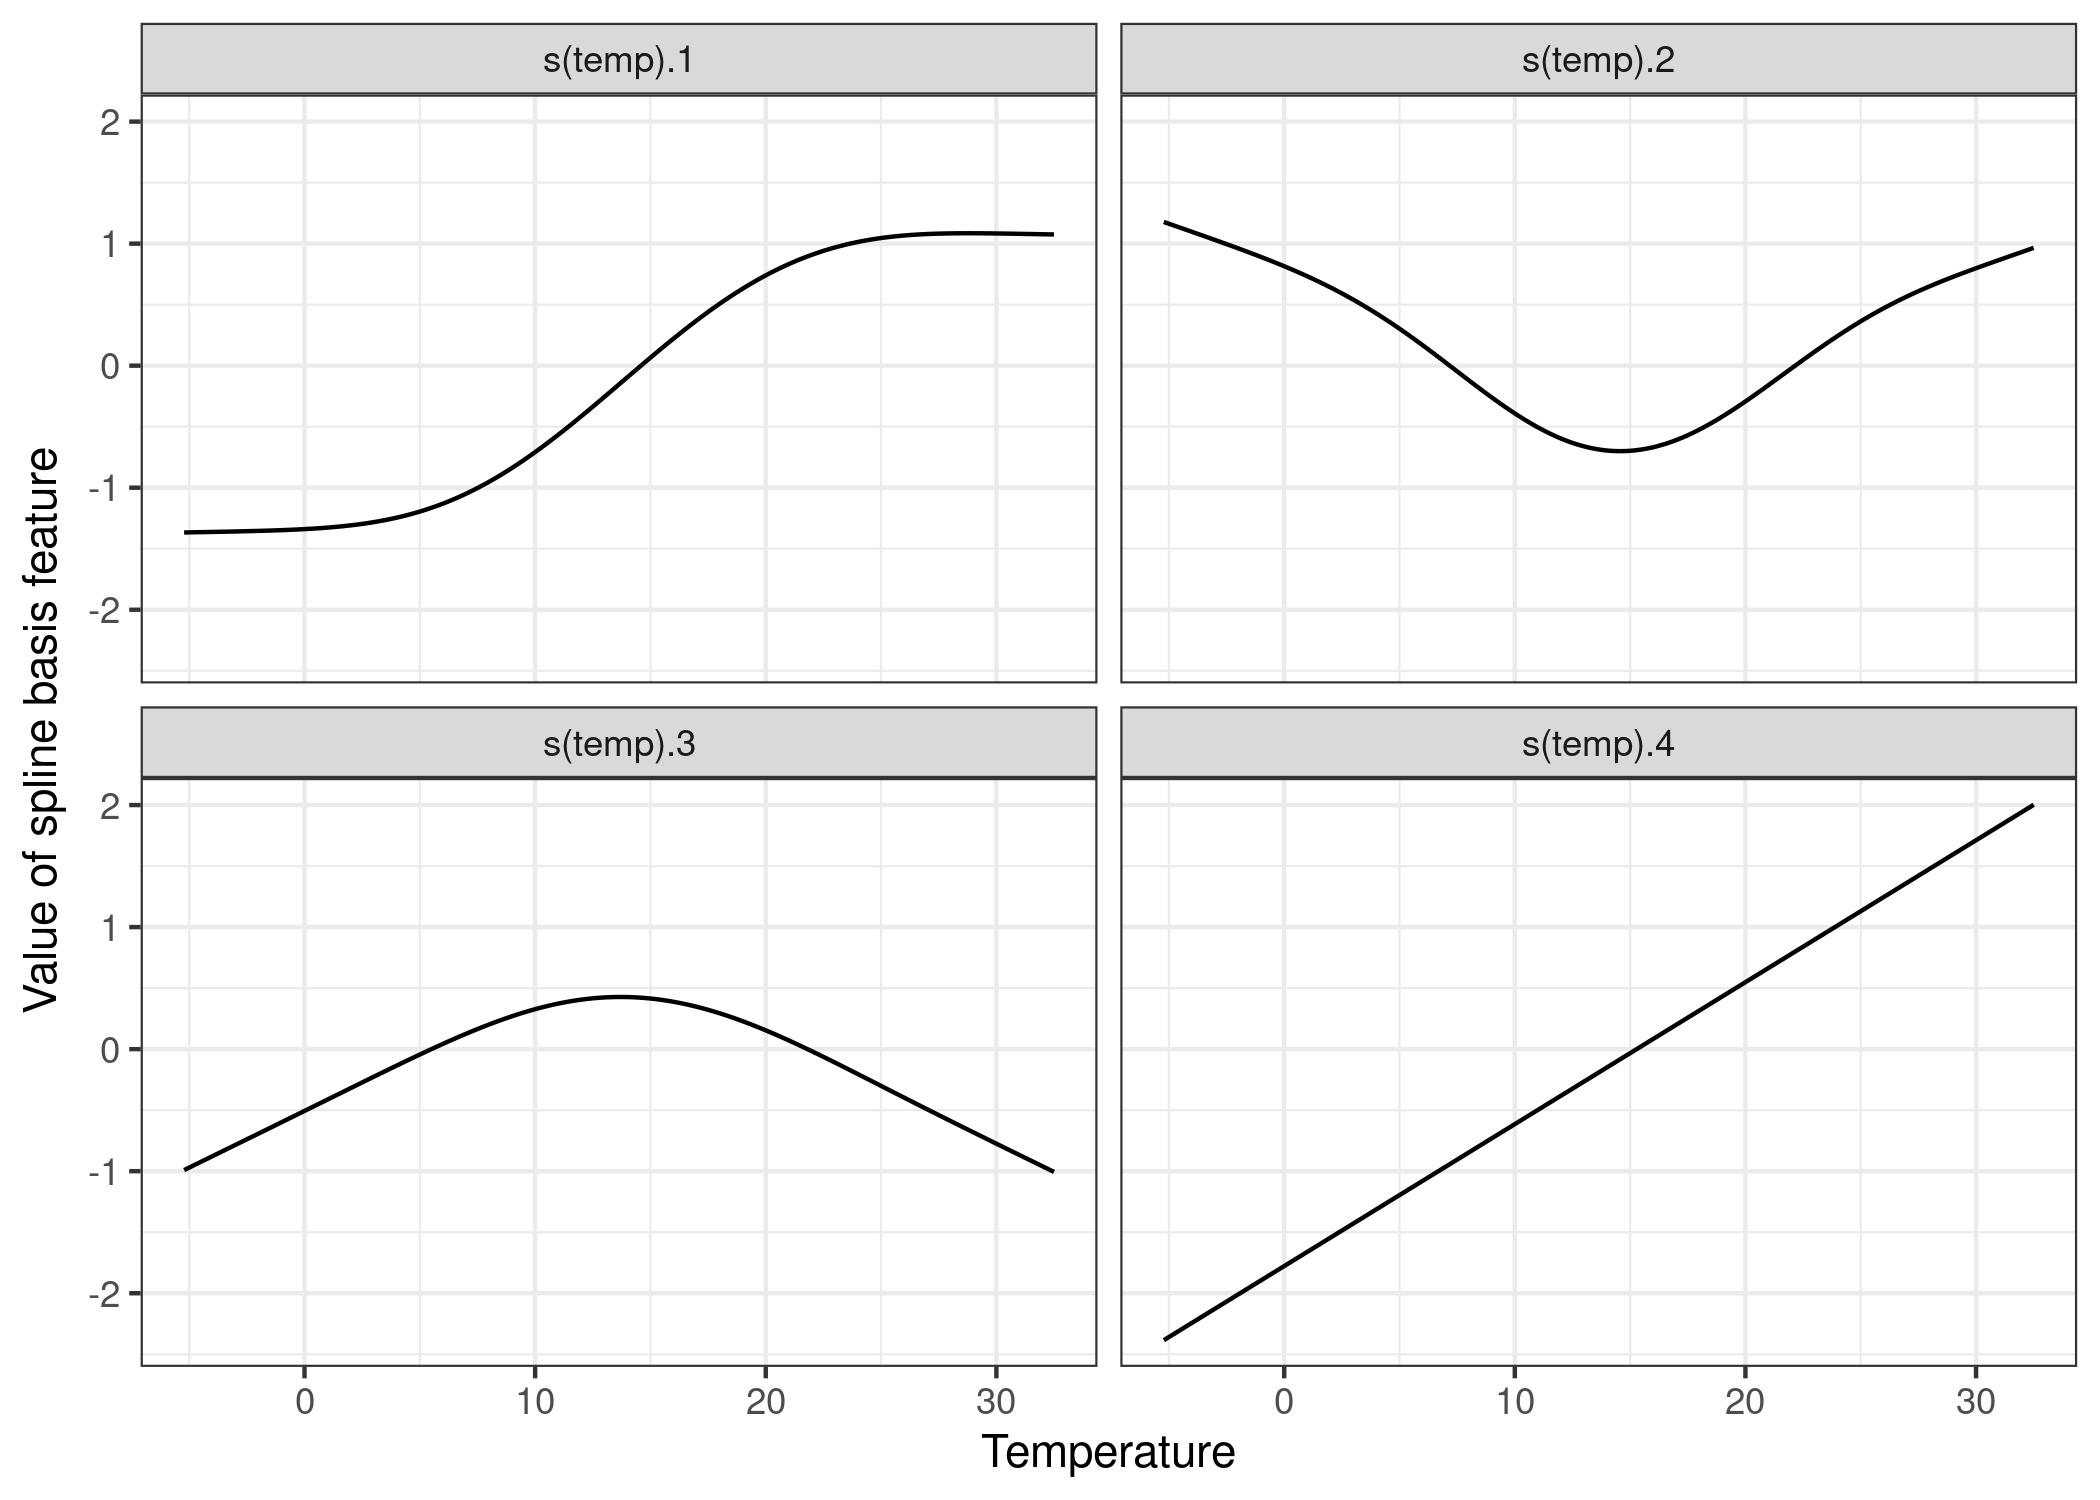 To smoothly model the temperature effect, we use 4 spline basis functions. Each temperature value is mapped to (here) 4 spline basis values. If an instance has a temperature of 30 °C, the value for the first spline basis feature is -1, for the second 0.7, for the third -0.8 and for the 4th 1.7.